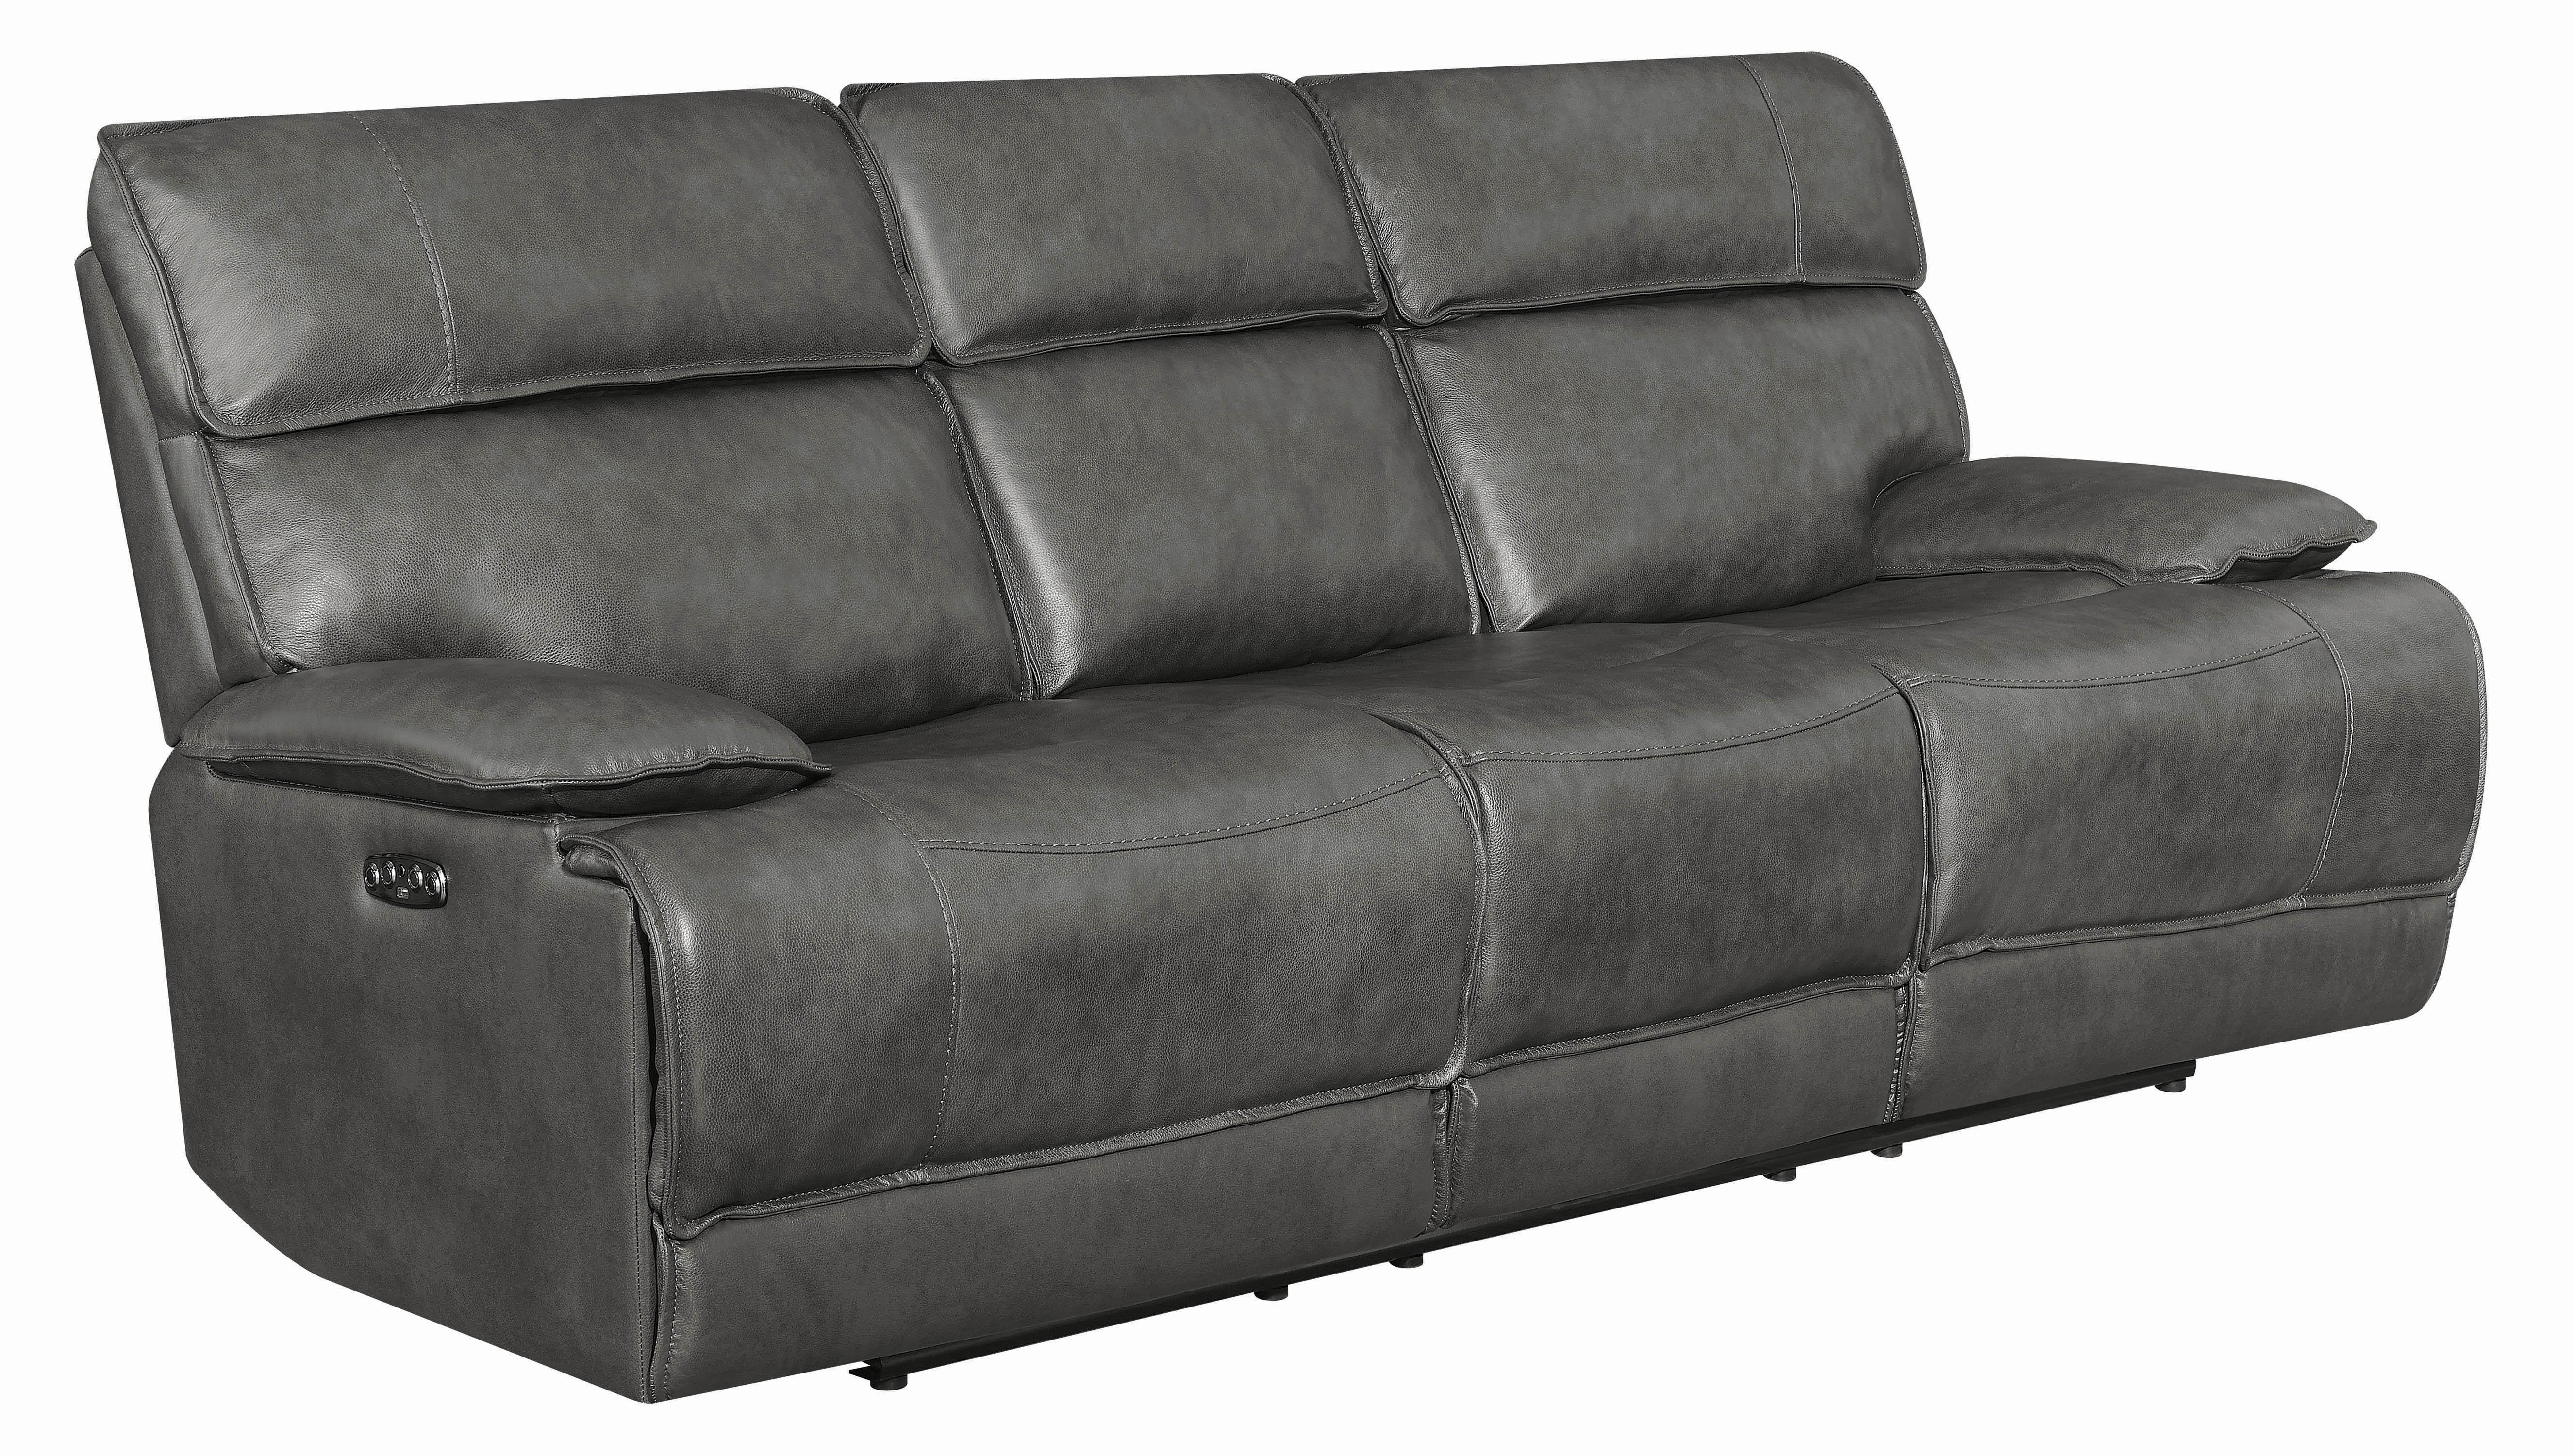 Modern Power sofa Stanford 650221P in Gray Leather